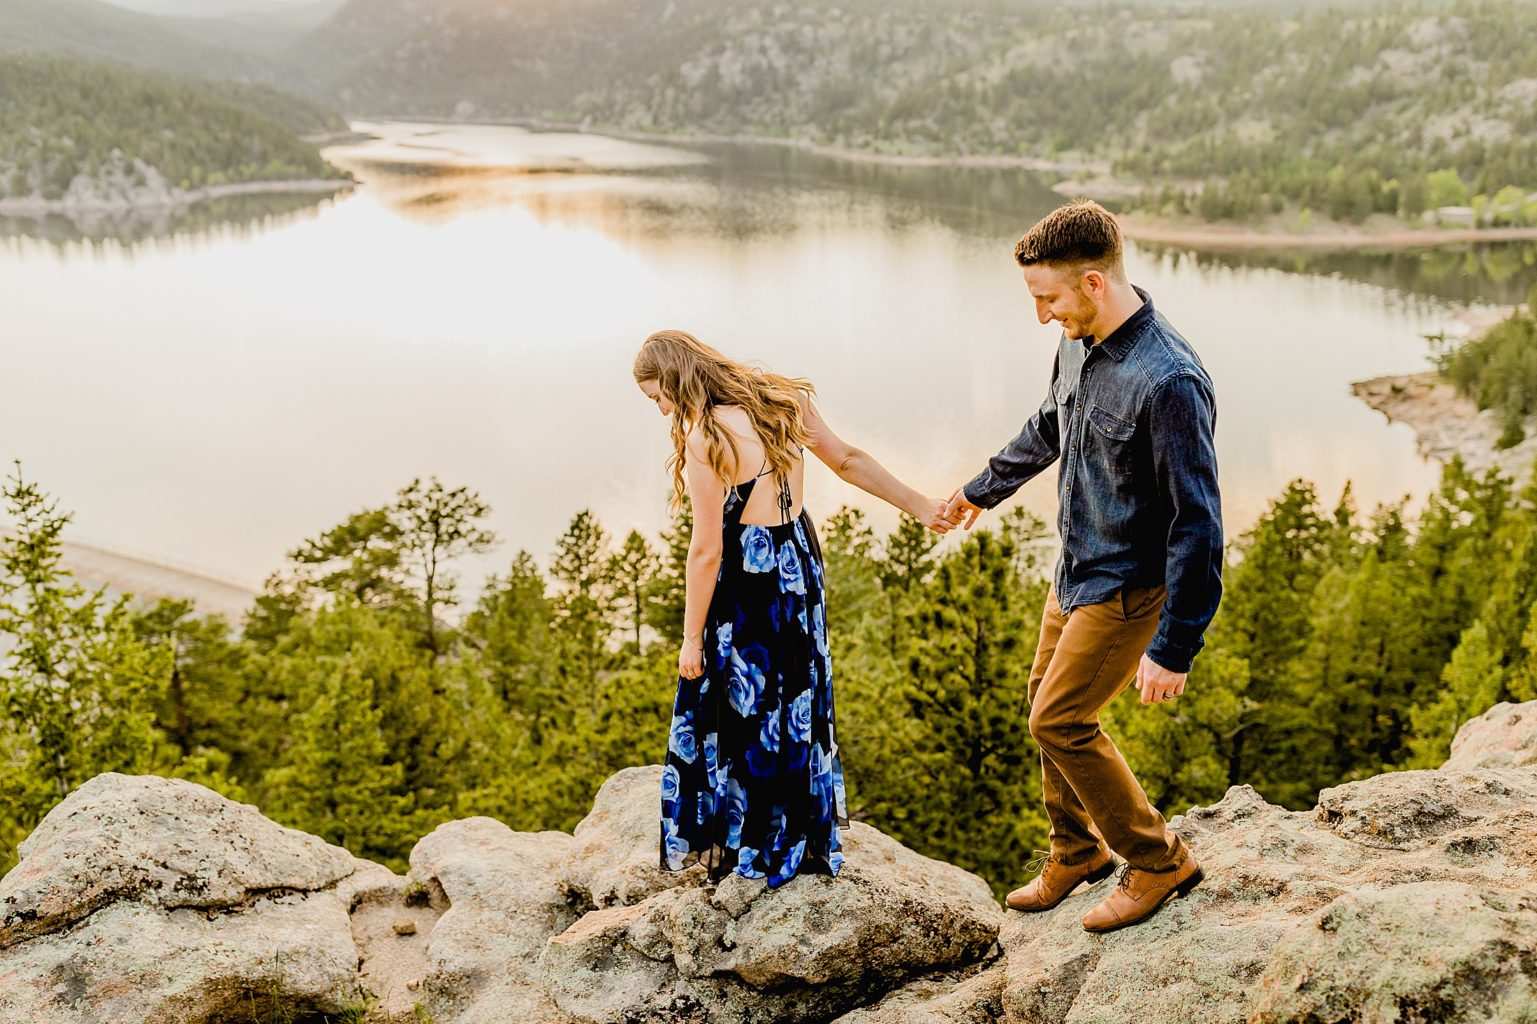 couple stands together overlooking incredible rocky mountain scenery and lake to celebrate anniversary